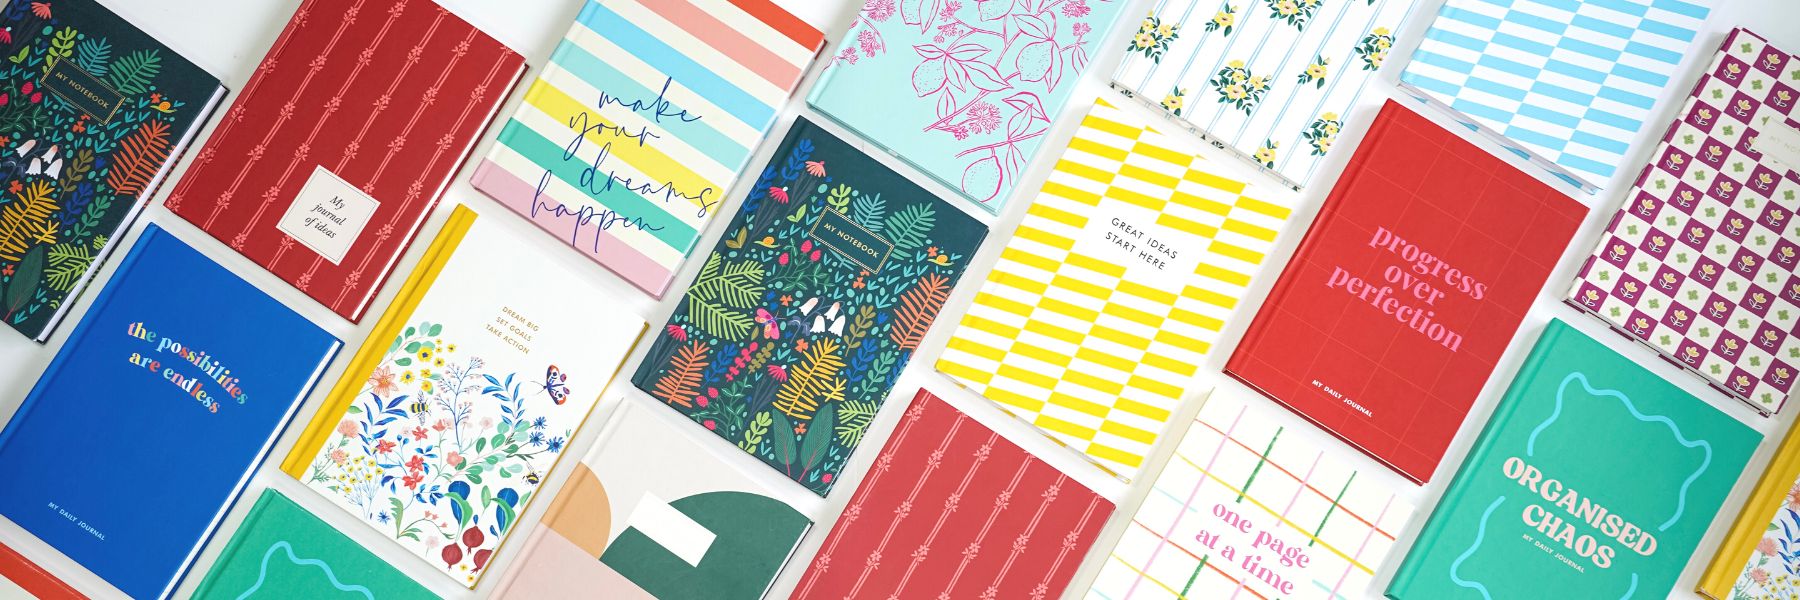 10 ways to fill up your blank notebooks and journals